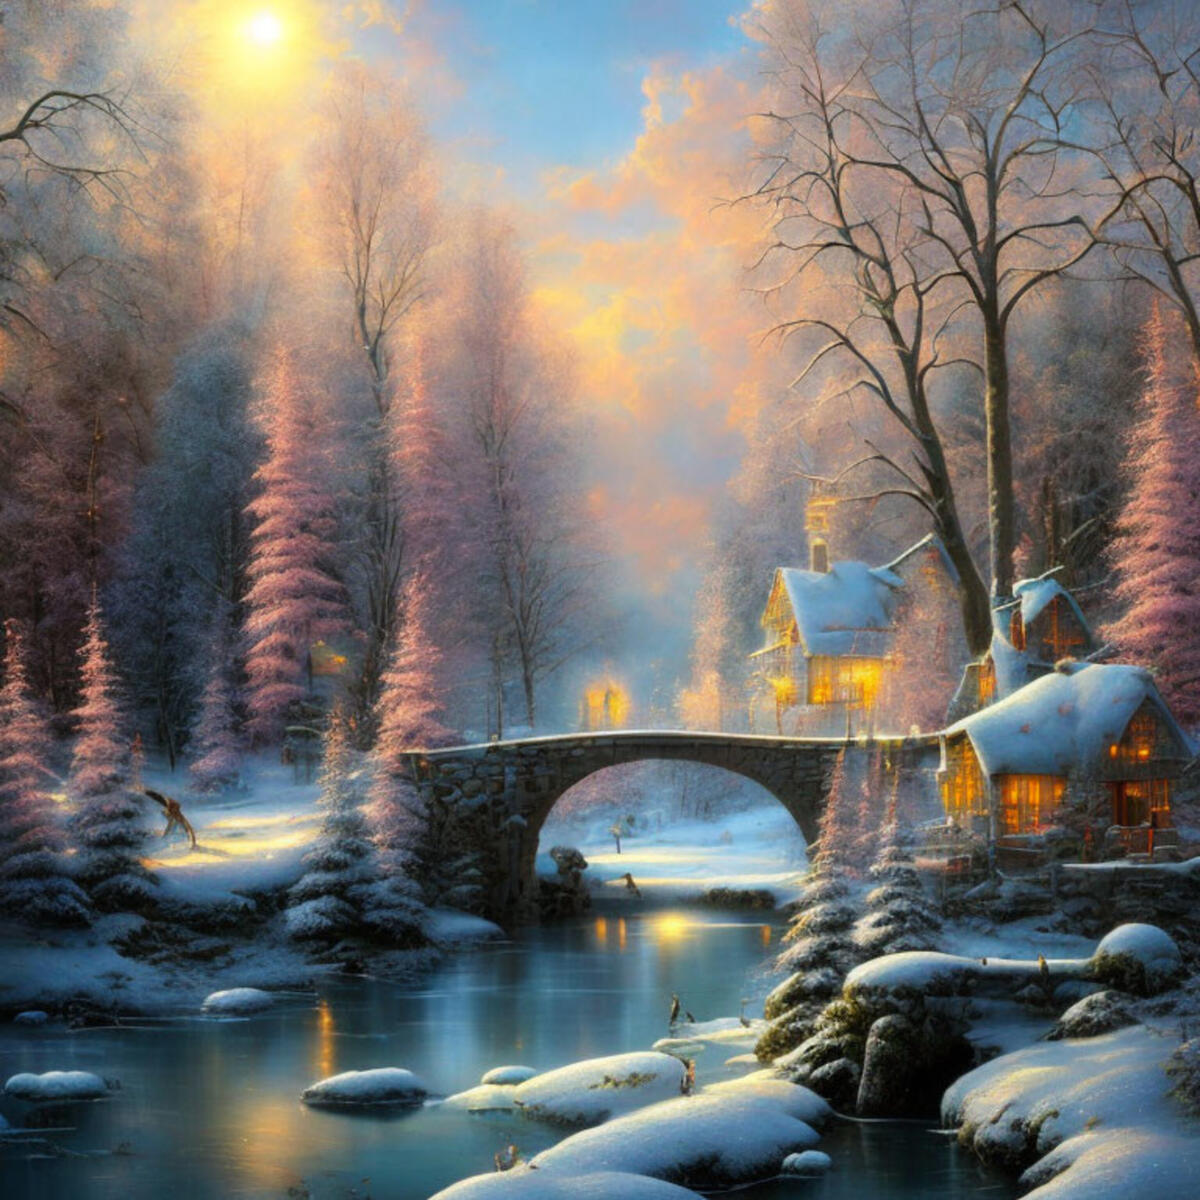 Dawn in the forest by the river with a cabin in wintertime